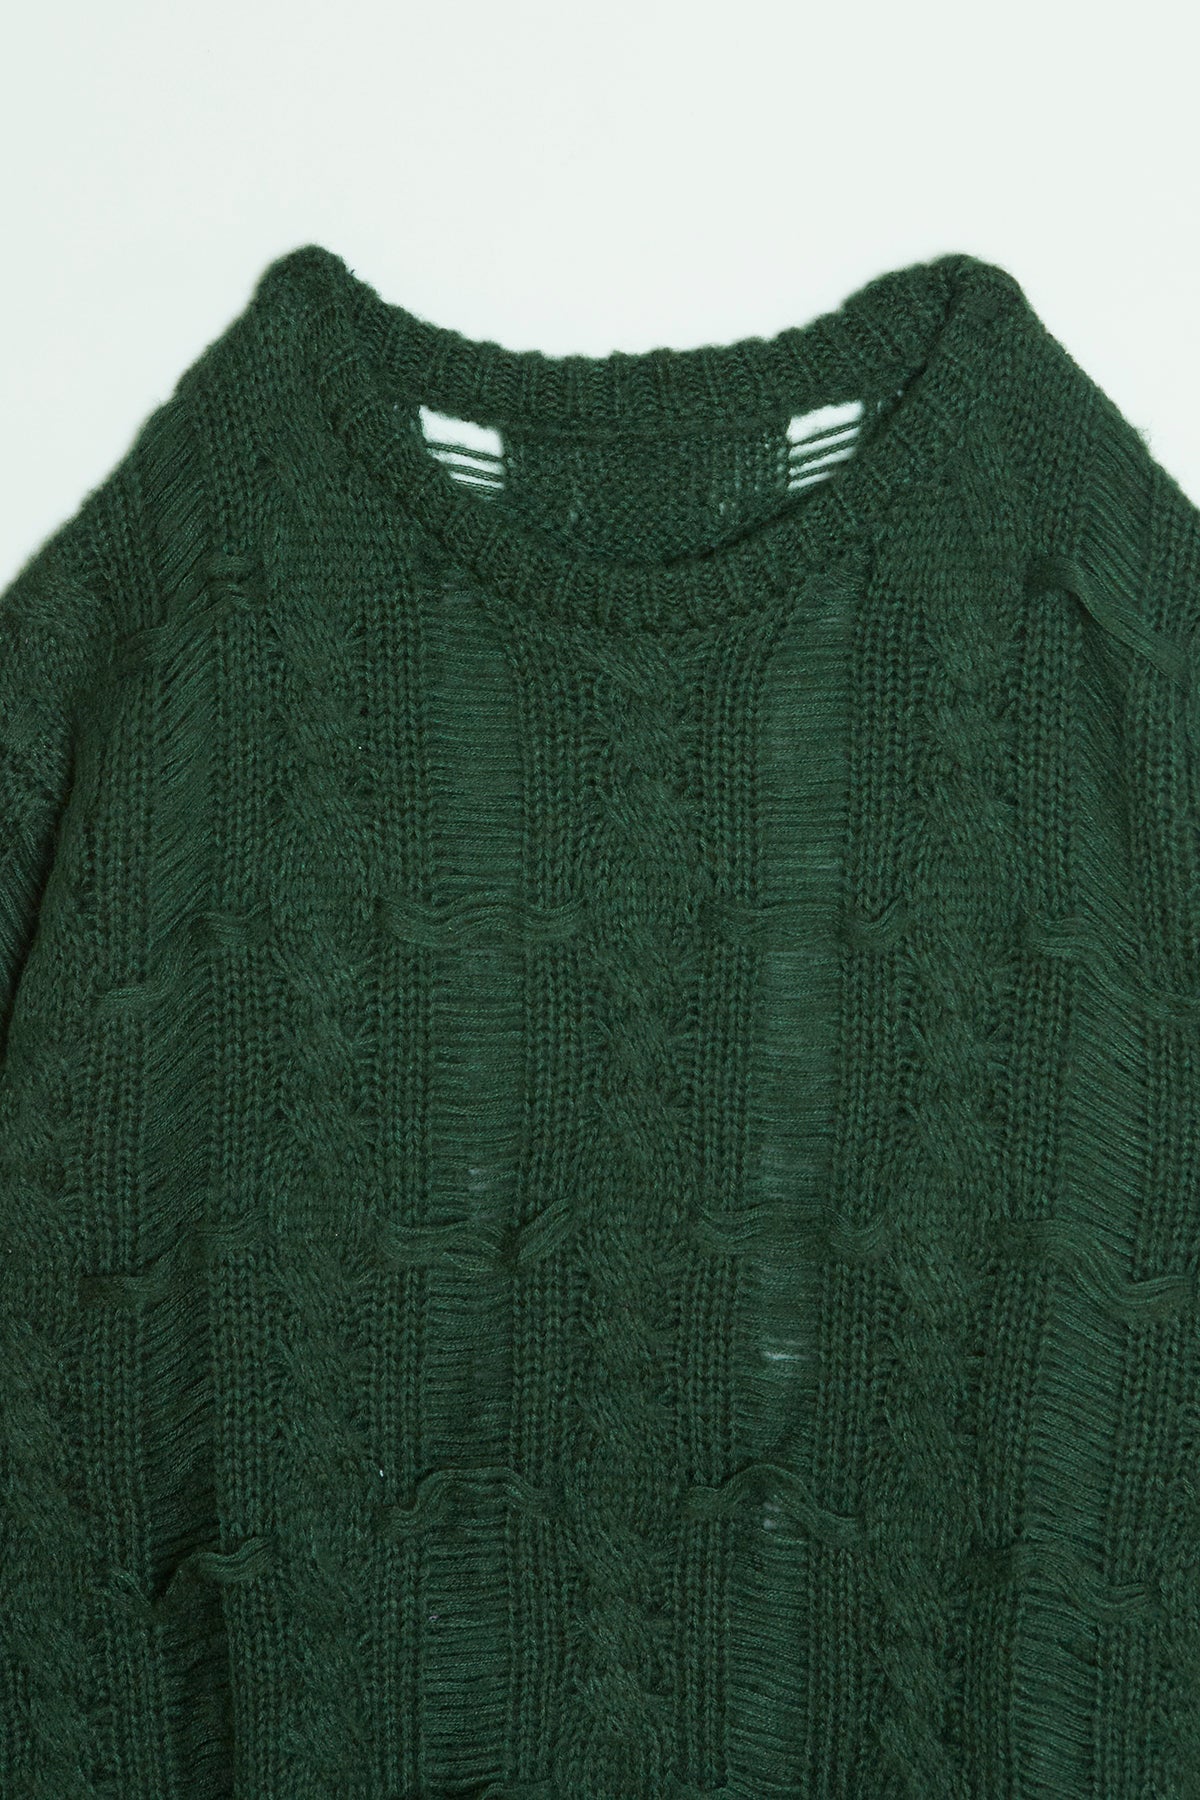 Different Wreck Knit Top / Green